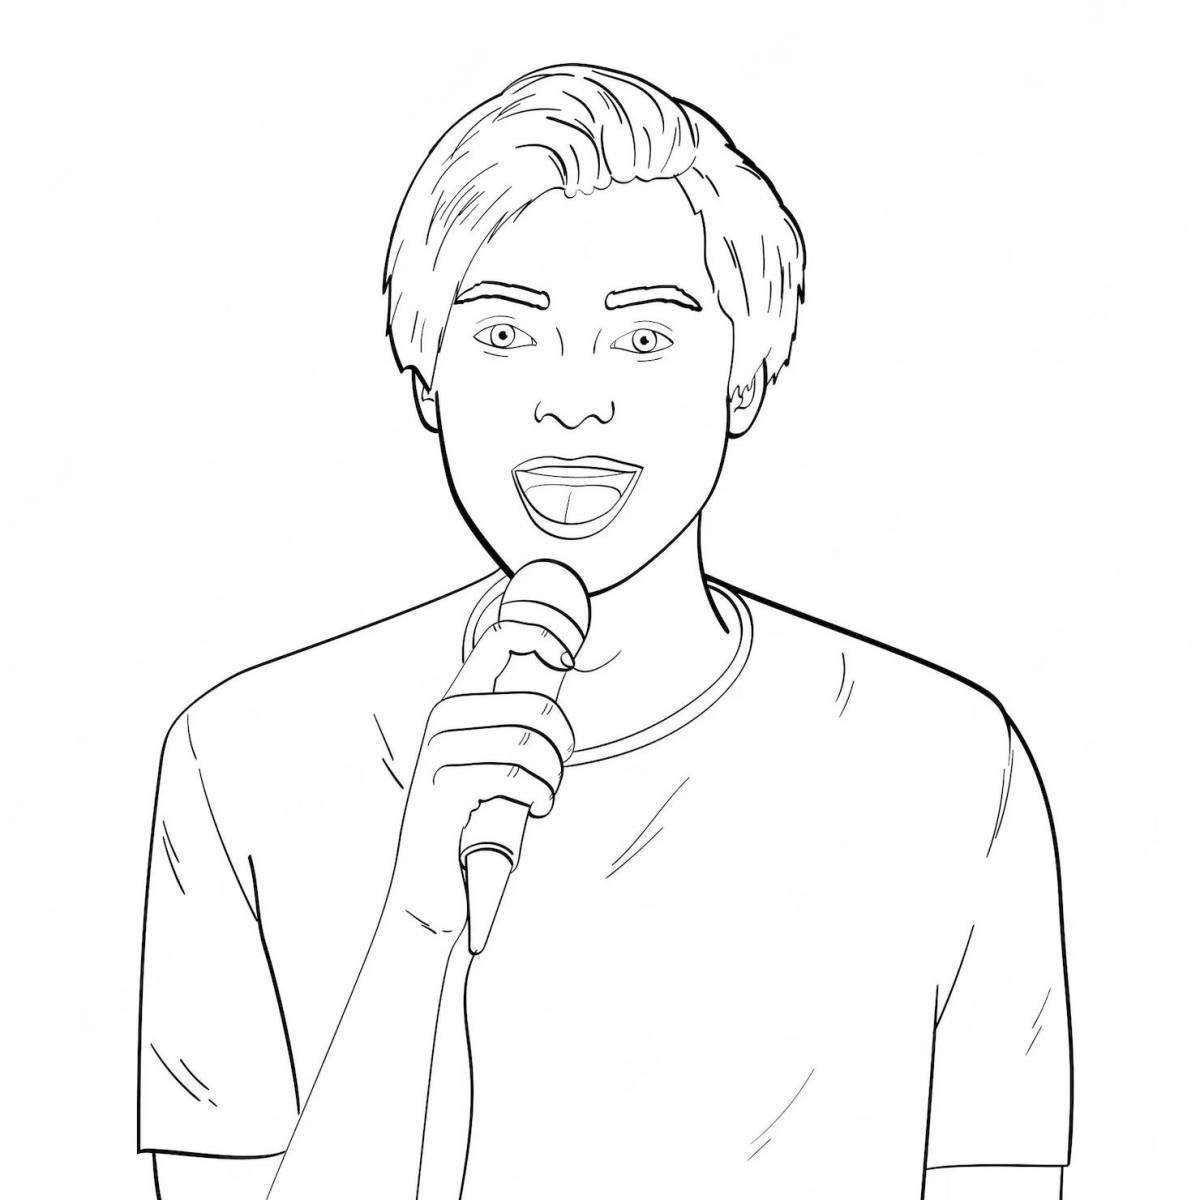 Sparkling singing coloring page